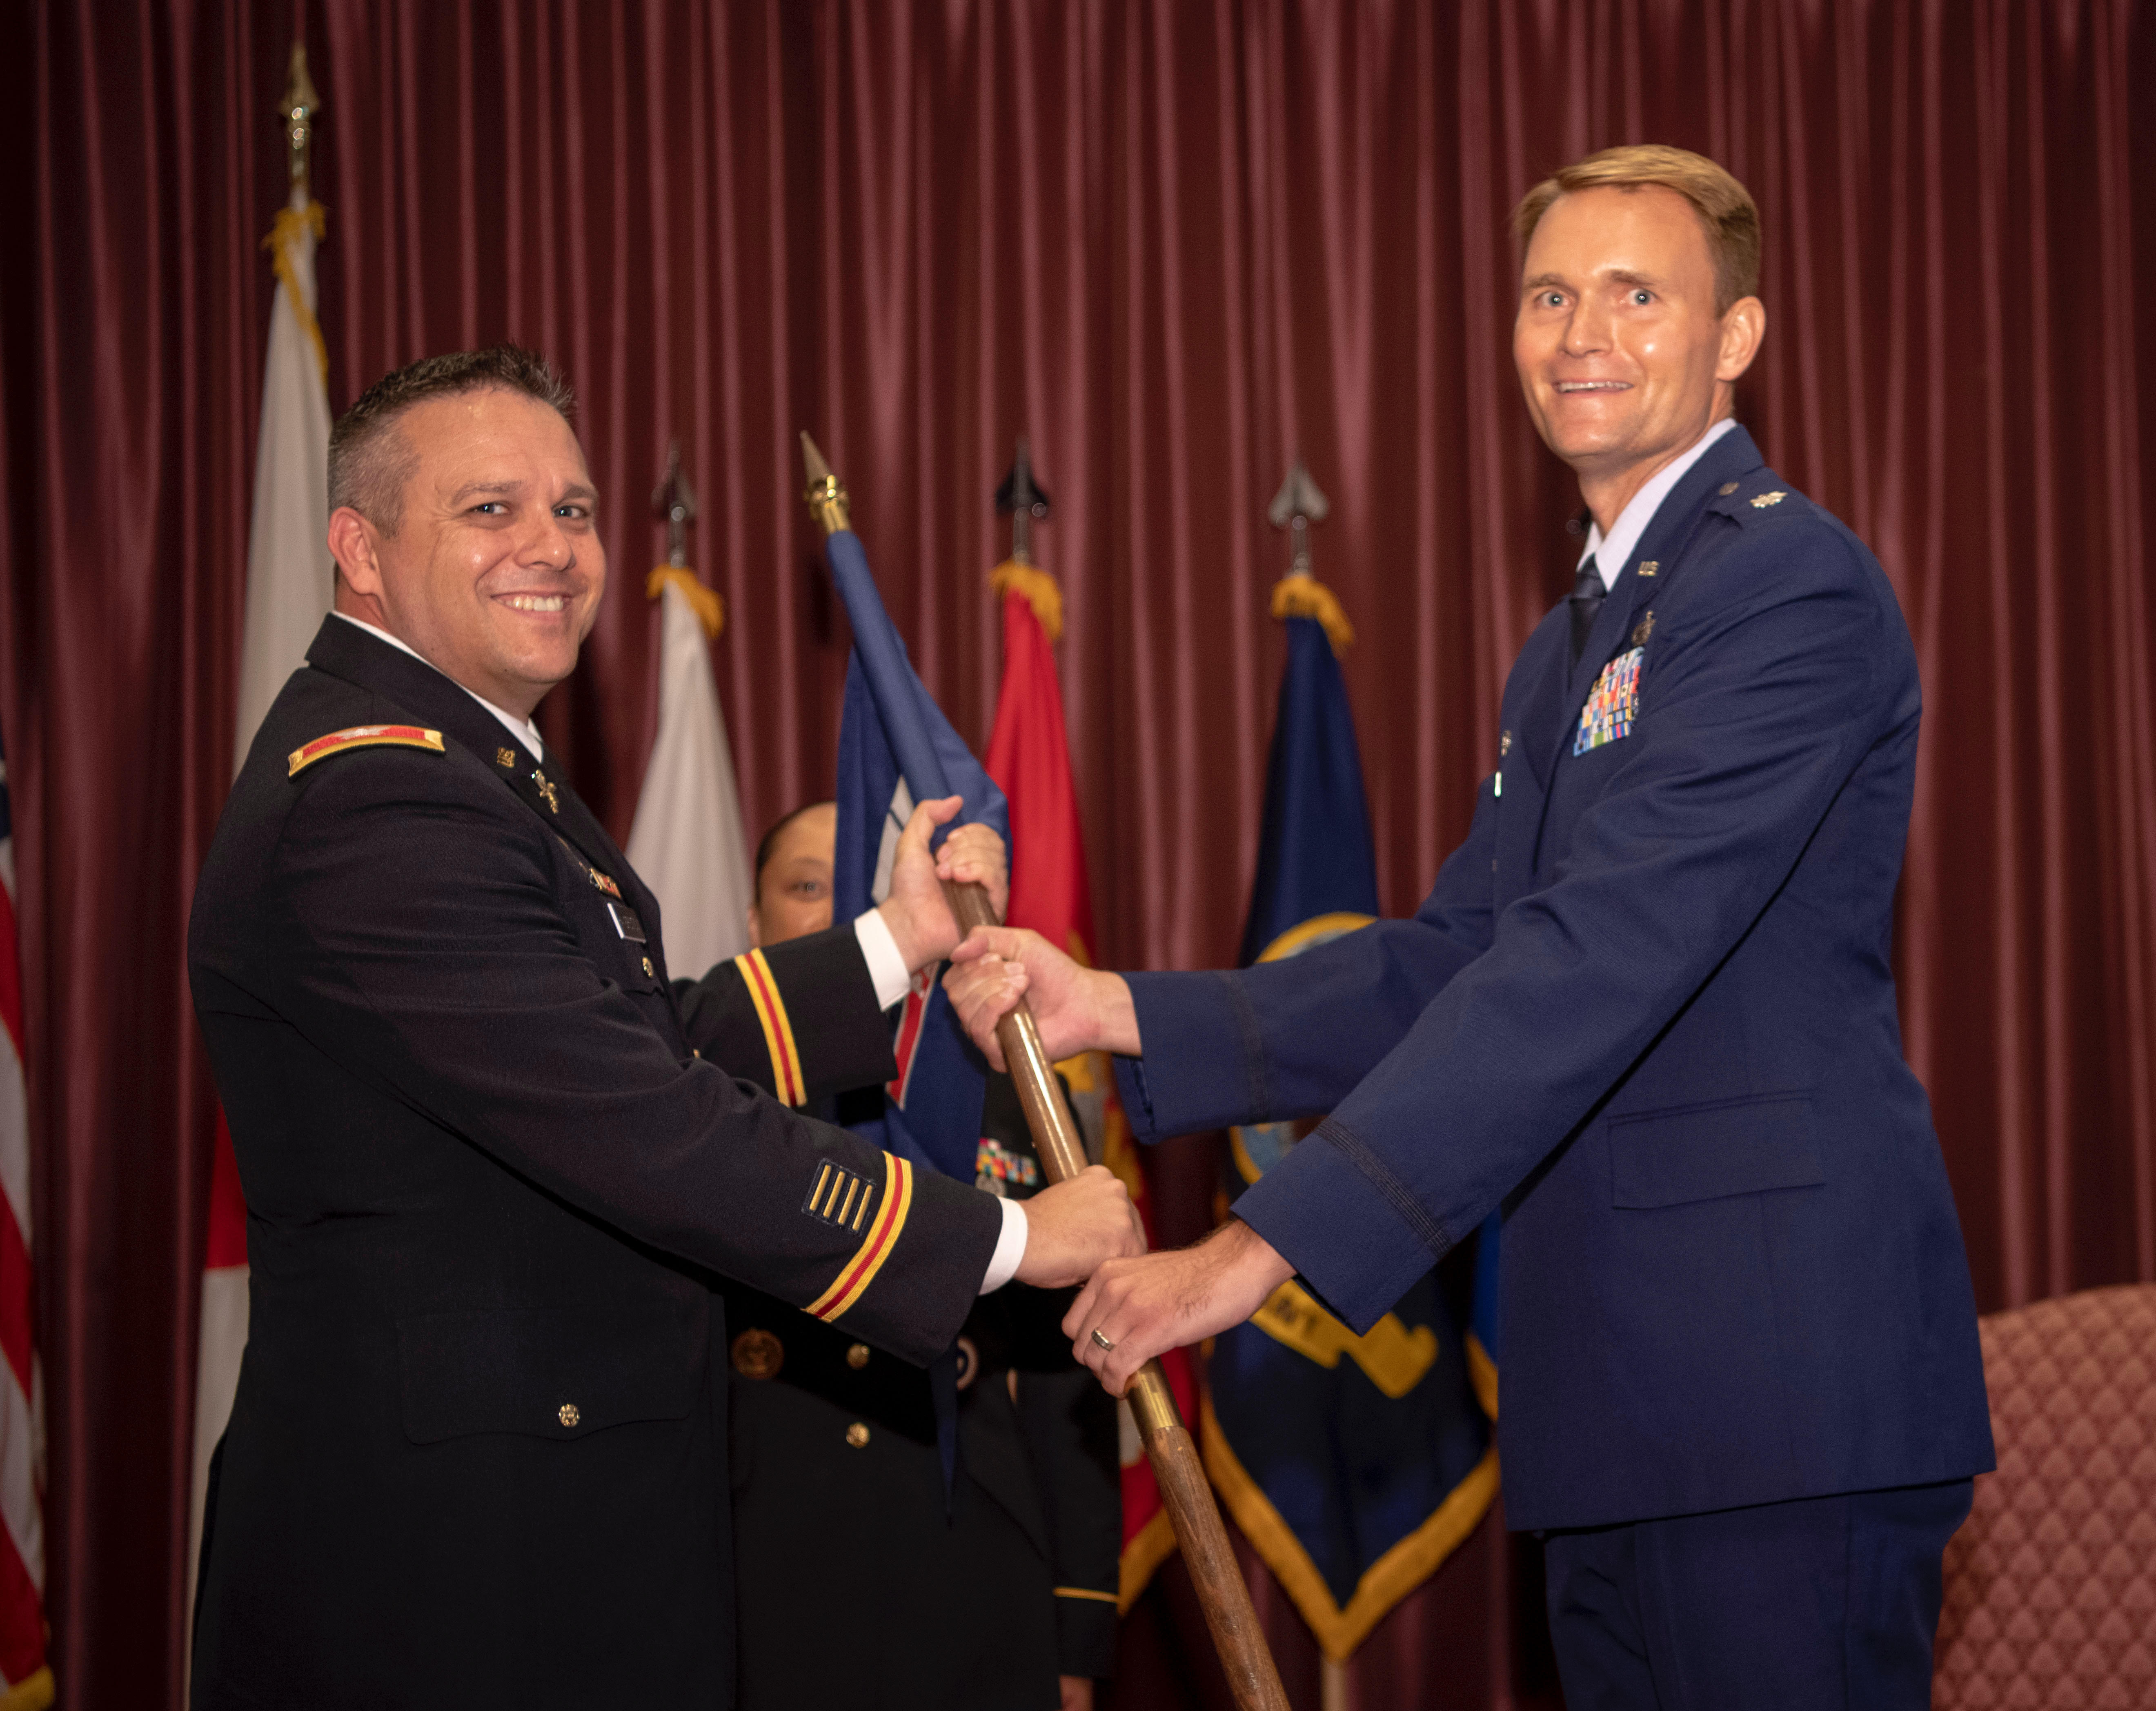 U.S. Army Col. Paul Haverstick, Defense Media Activity director, charges U.S. Air Force Lt. Col. Phil Ventura '00 with command of American Forces Network-Pacific at a ceremony on Yokota Air Base, Japan, Aug. 9, 2019.